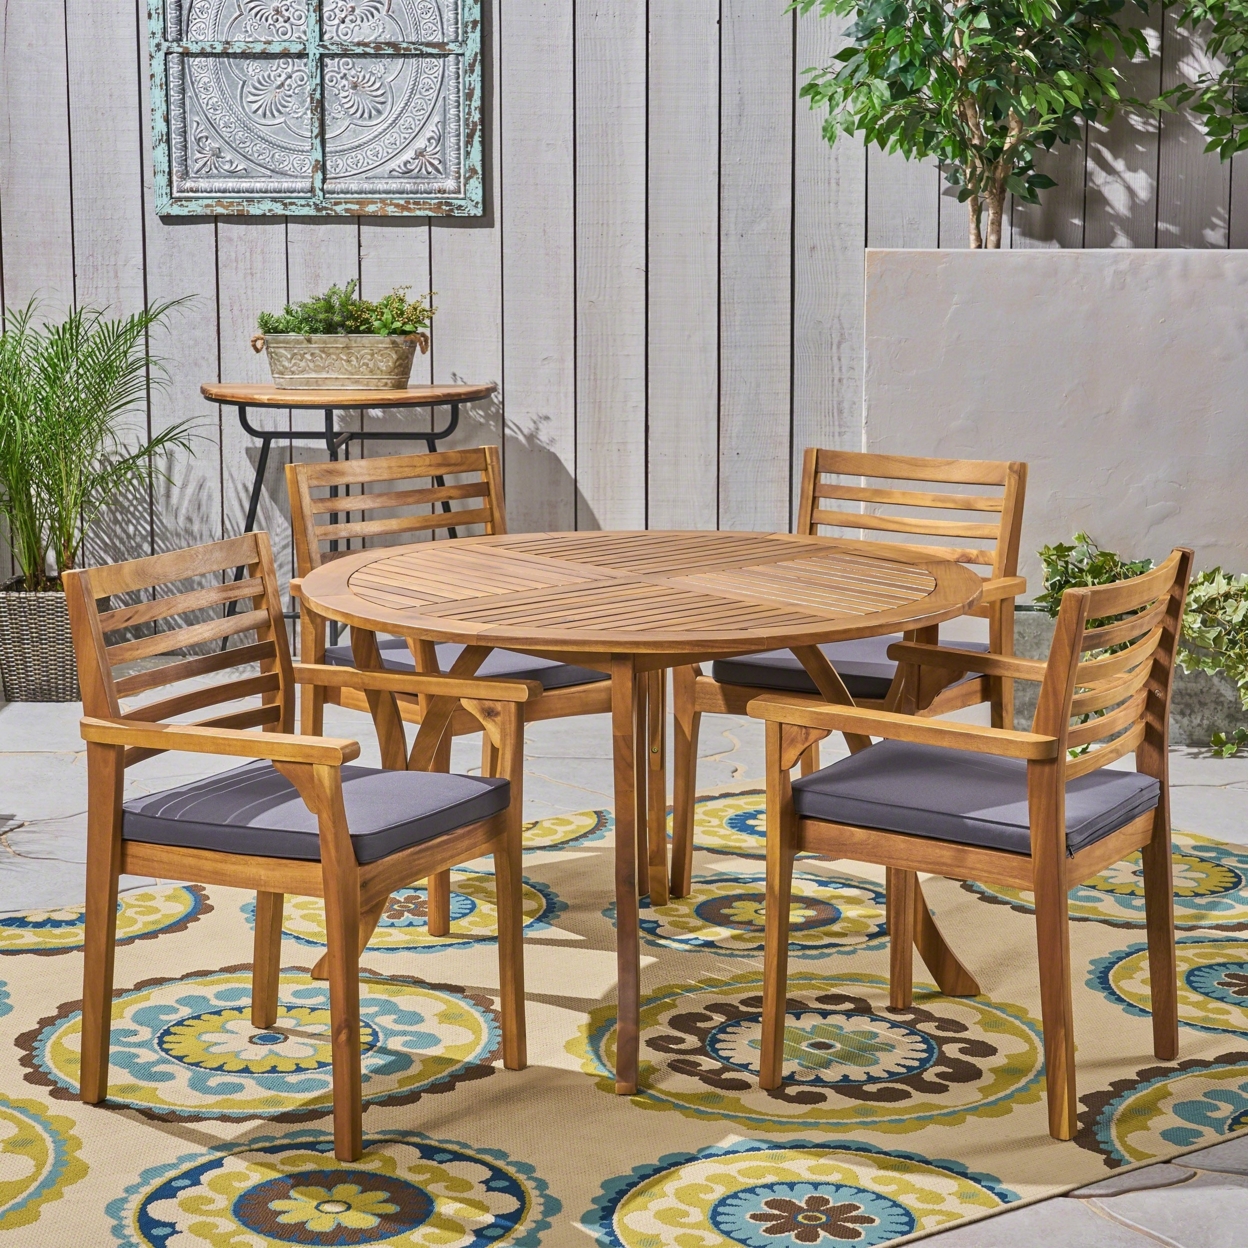 Phoenix Outdoor Acacia 4-Seater Dining Set With Cushions And 47 Round Table With Carved Legs - Gray